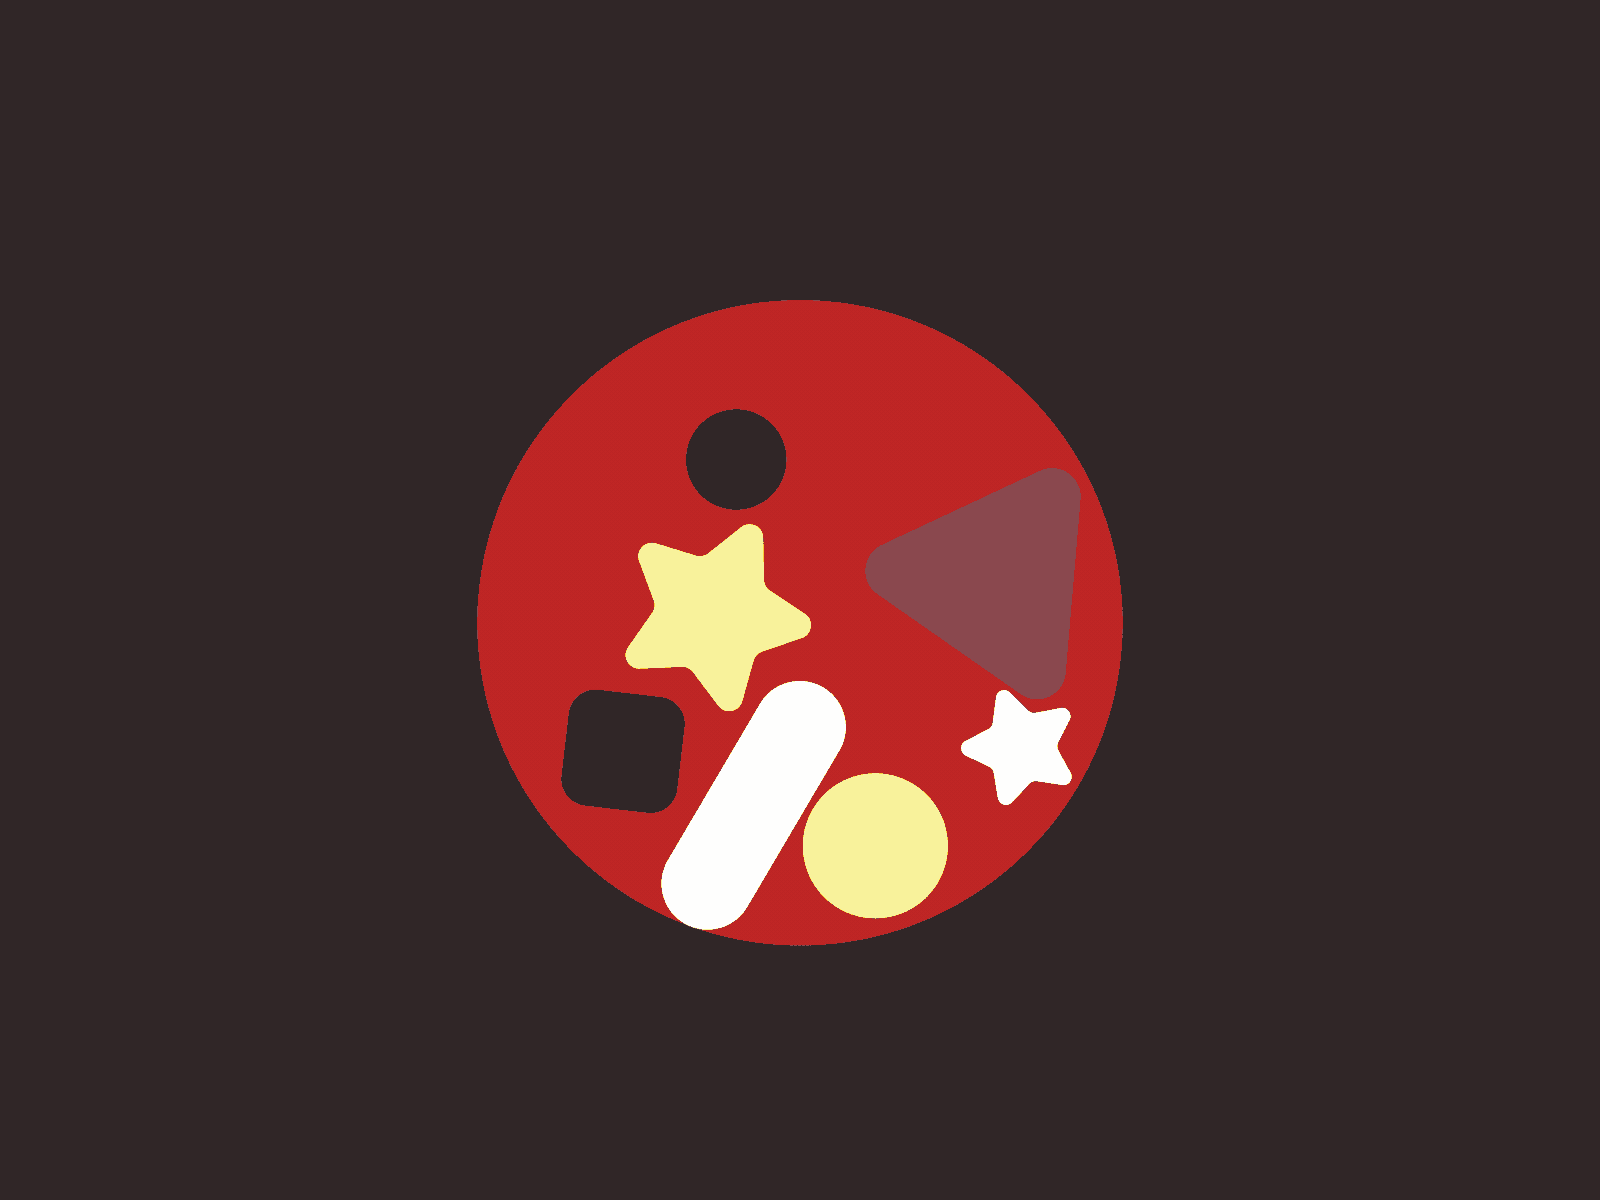 ⭑ Giggle Giggle Little Stars ⭑ 2d animation bounce brown filippo marchetti flat illustration logo animation minimal motion graphics red smear yellow